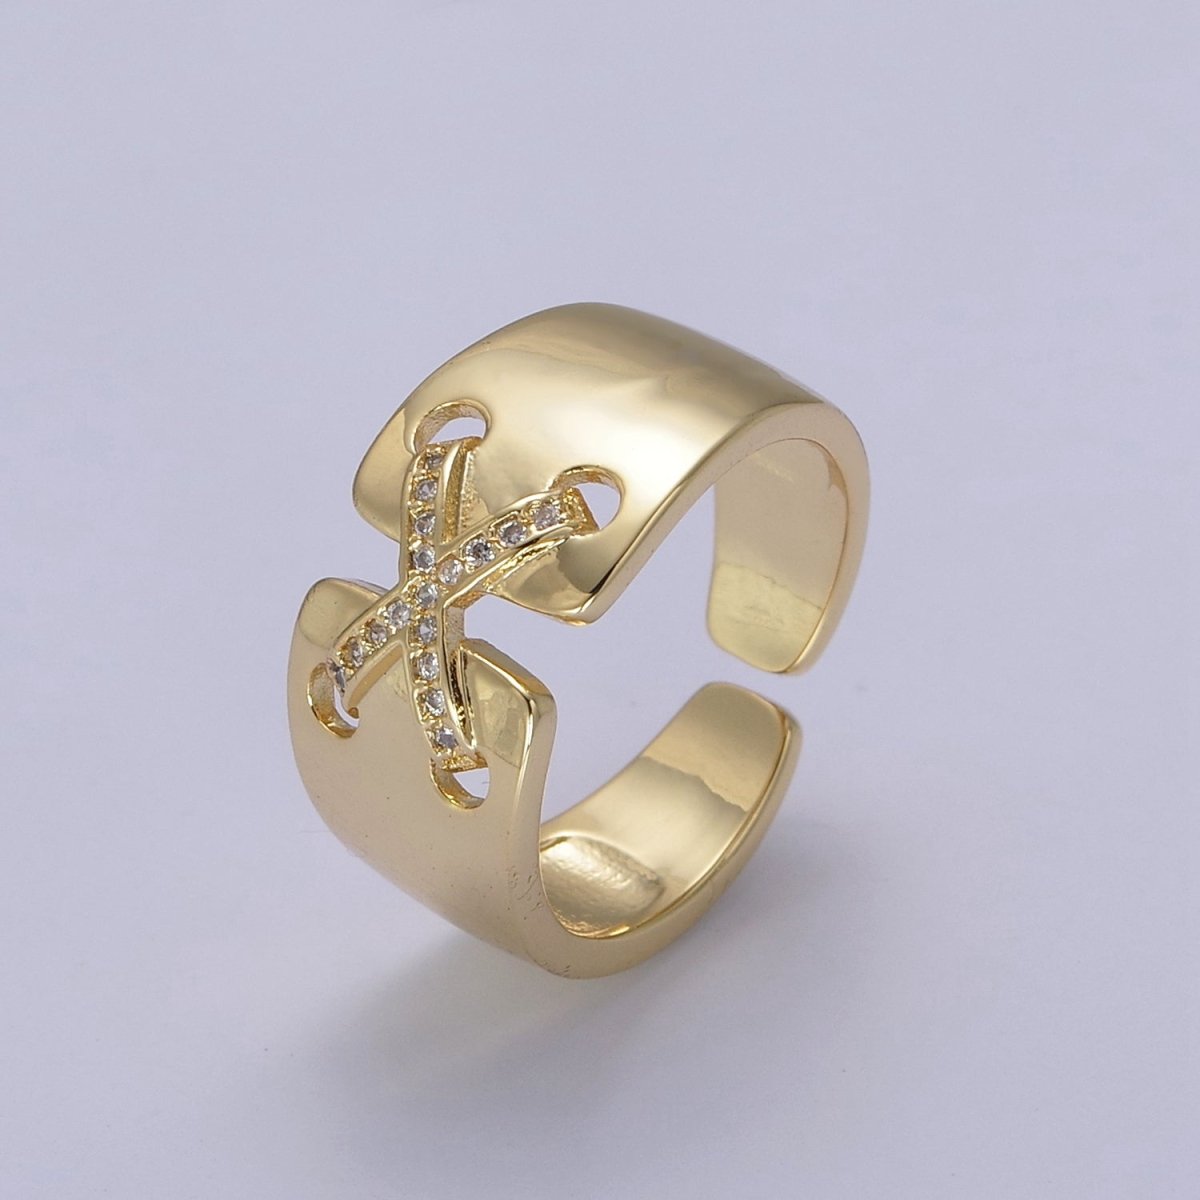 24K Gold Filled Cross X Ribbon Tied Ring, Thick Statement Gold & Silver Open Adjustable Ring U-533 U-534 - DLUXCA